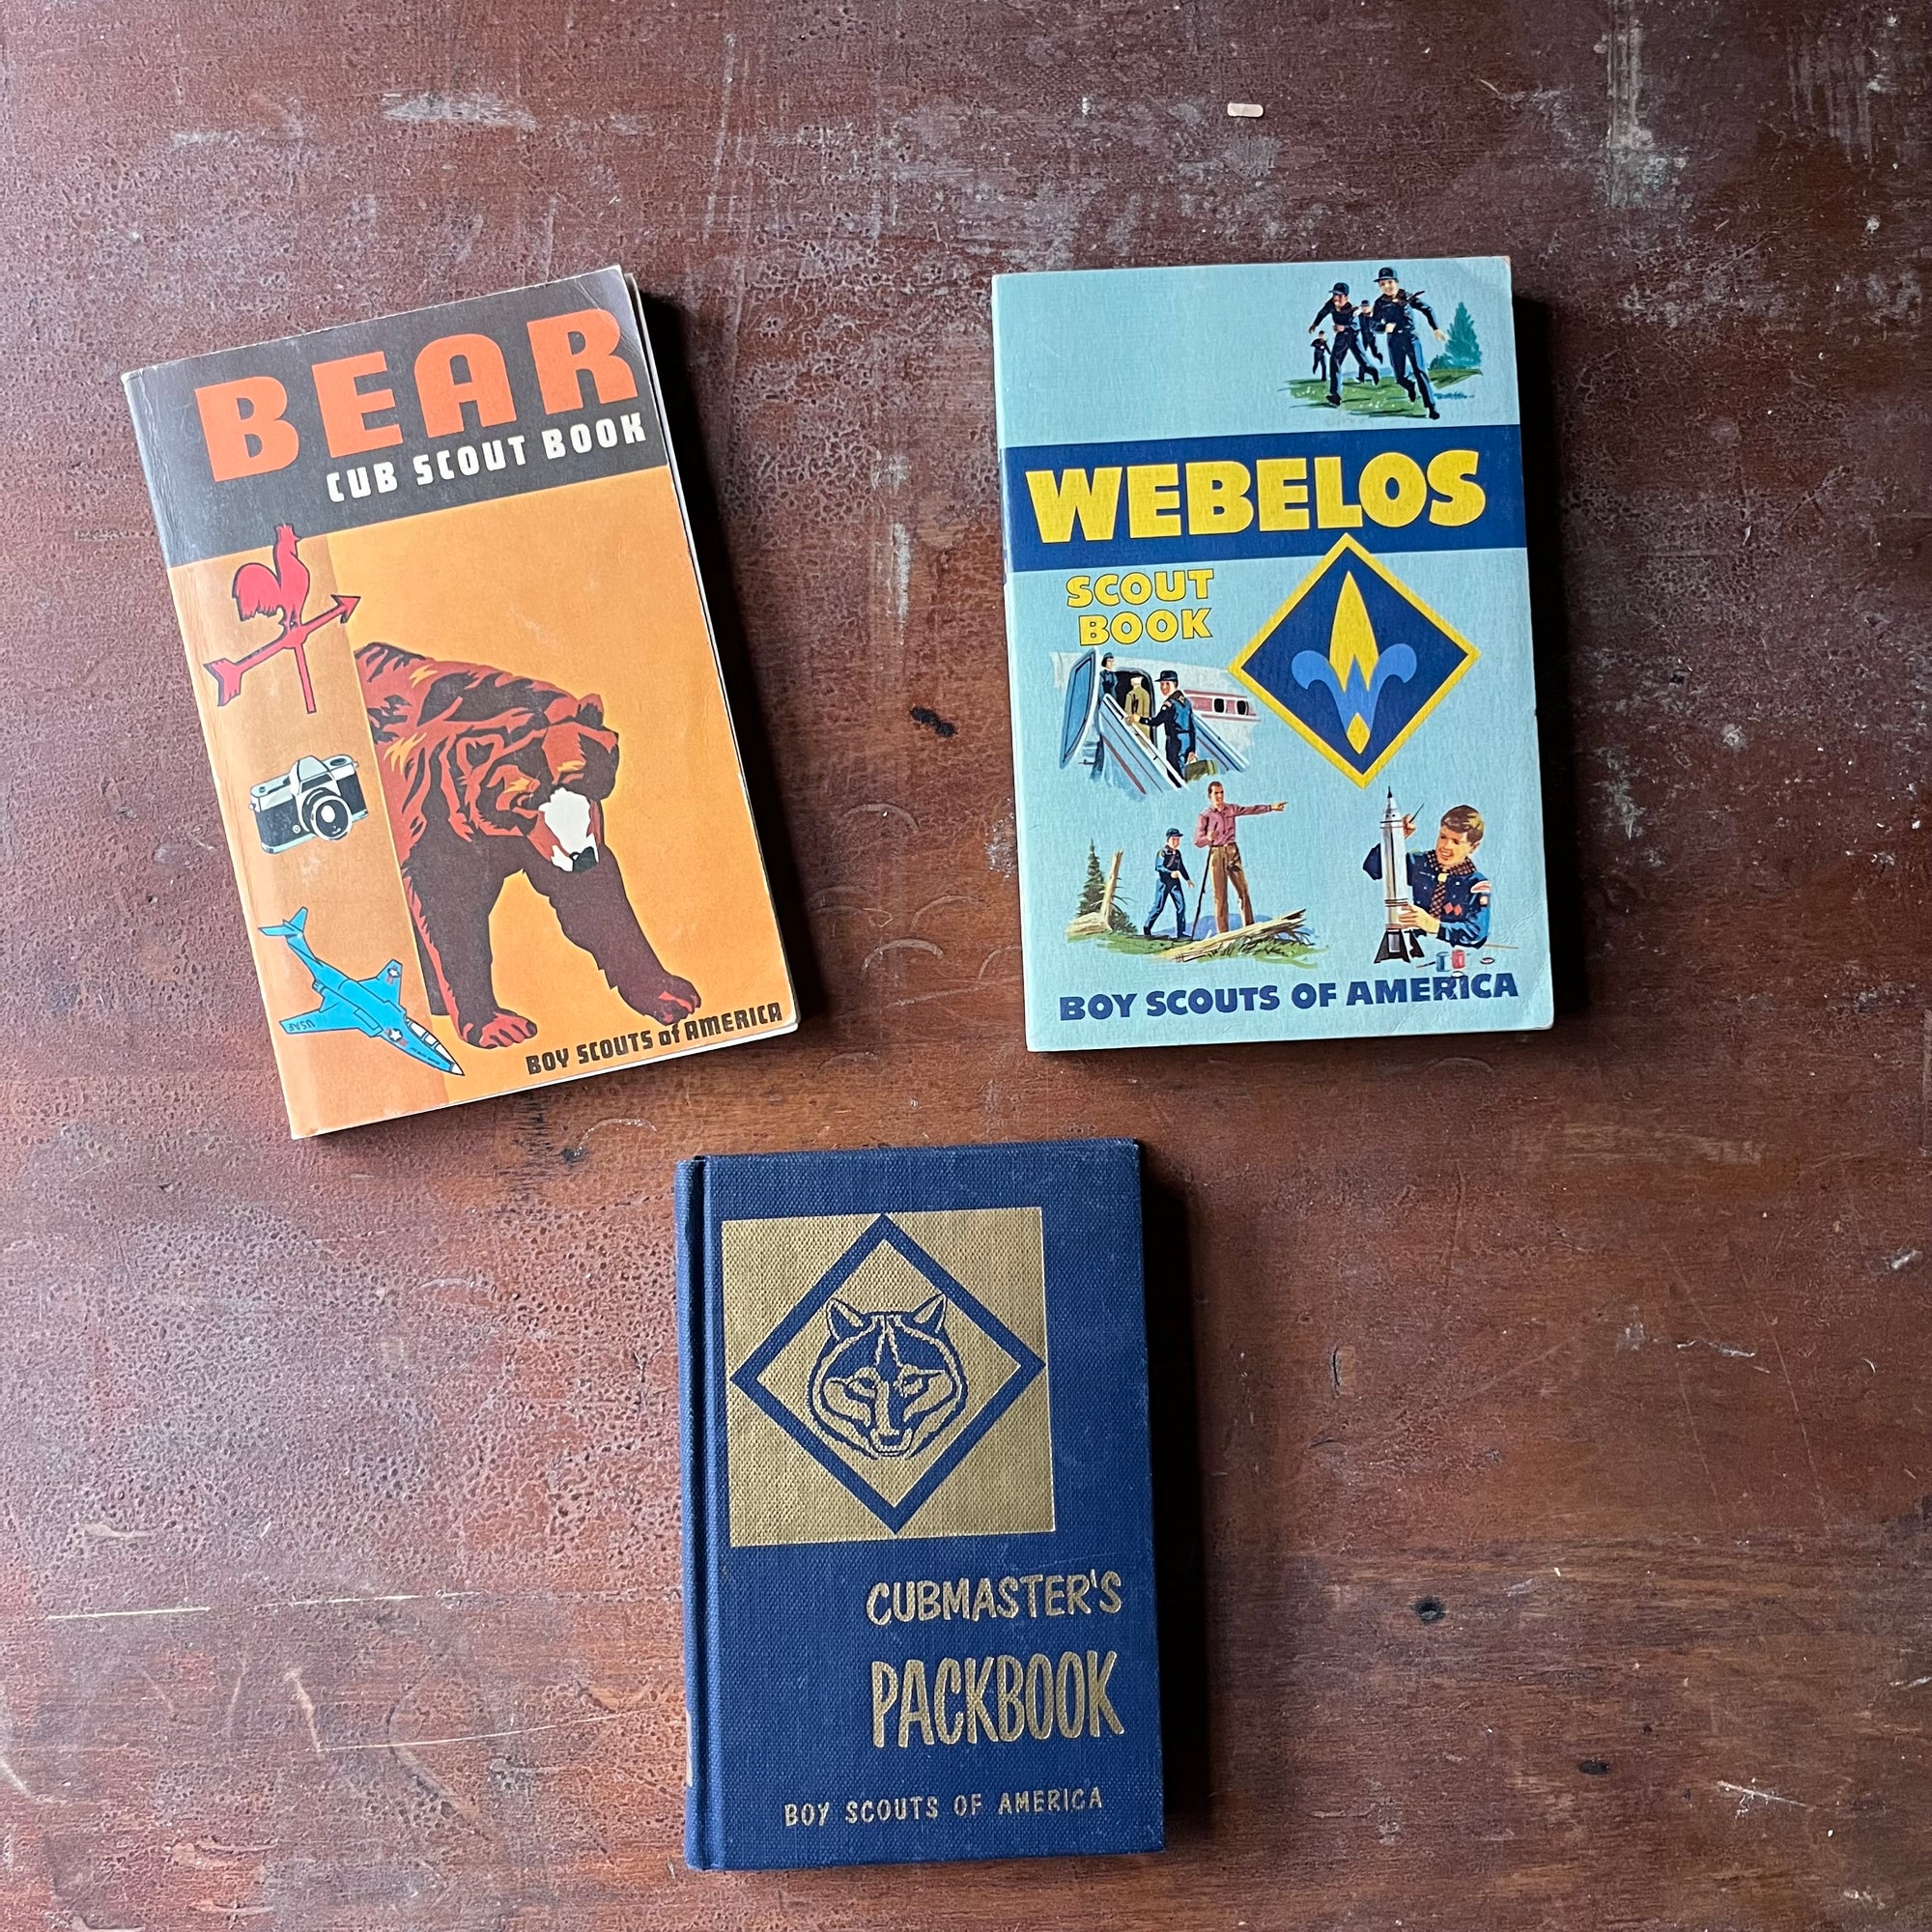 Set of Three Vintage Cub & Boy Scout Books - Webelos Scout Book, Cubmaster's Packbook & Bear Cub Scout Book - view of the front covers